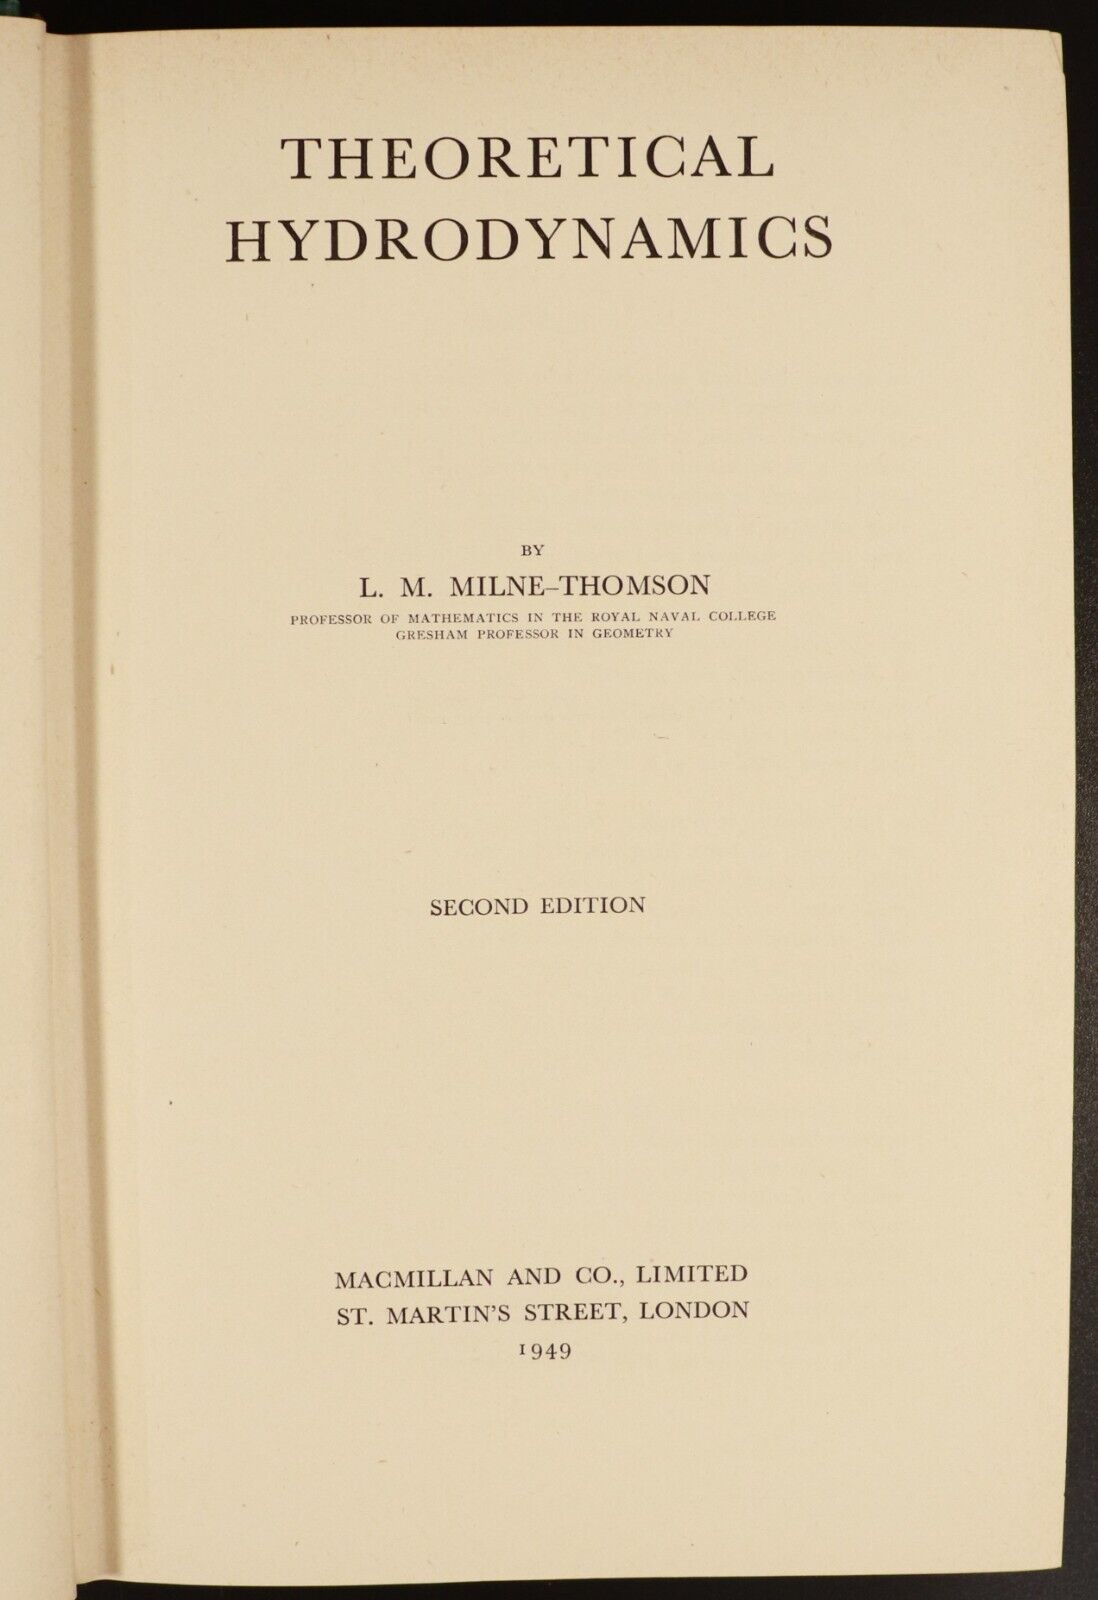 1949 Theoretical Hydrodynamics by L Milne Thomson Vintage Science Reference Book - 0